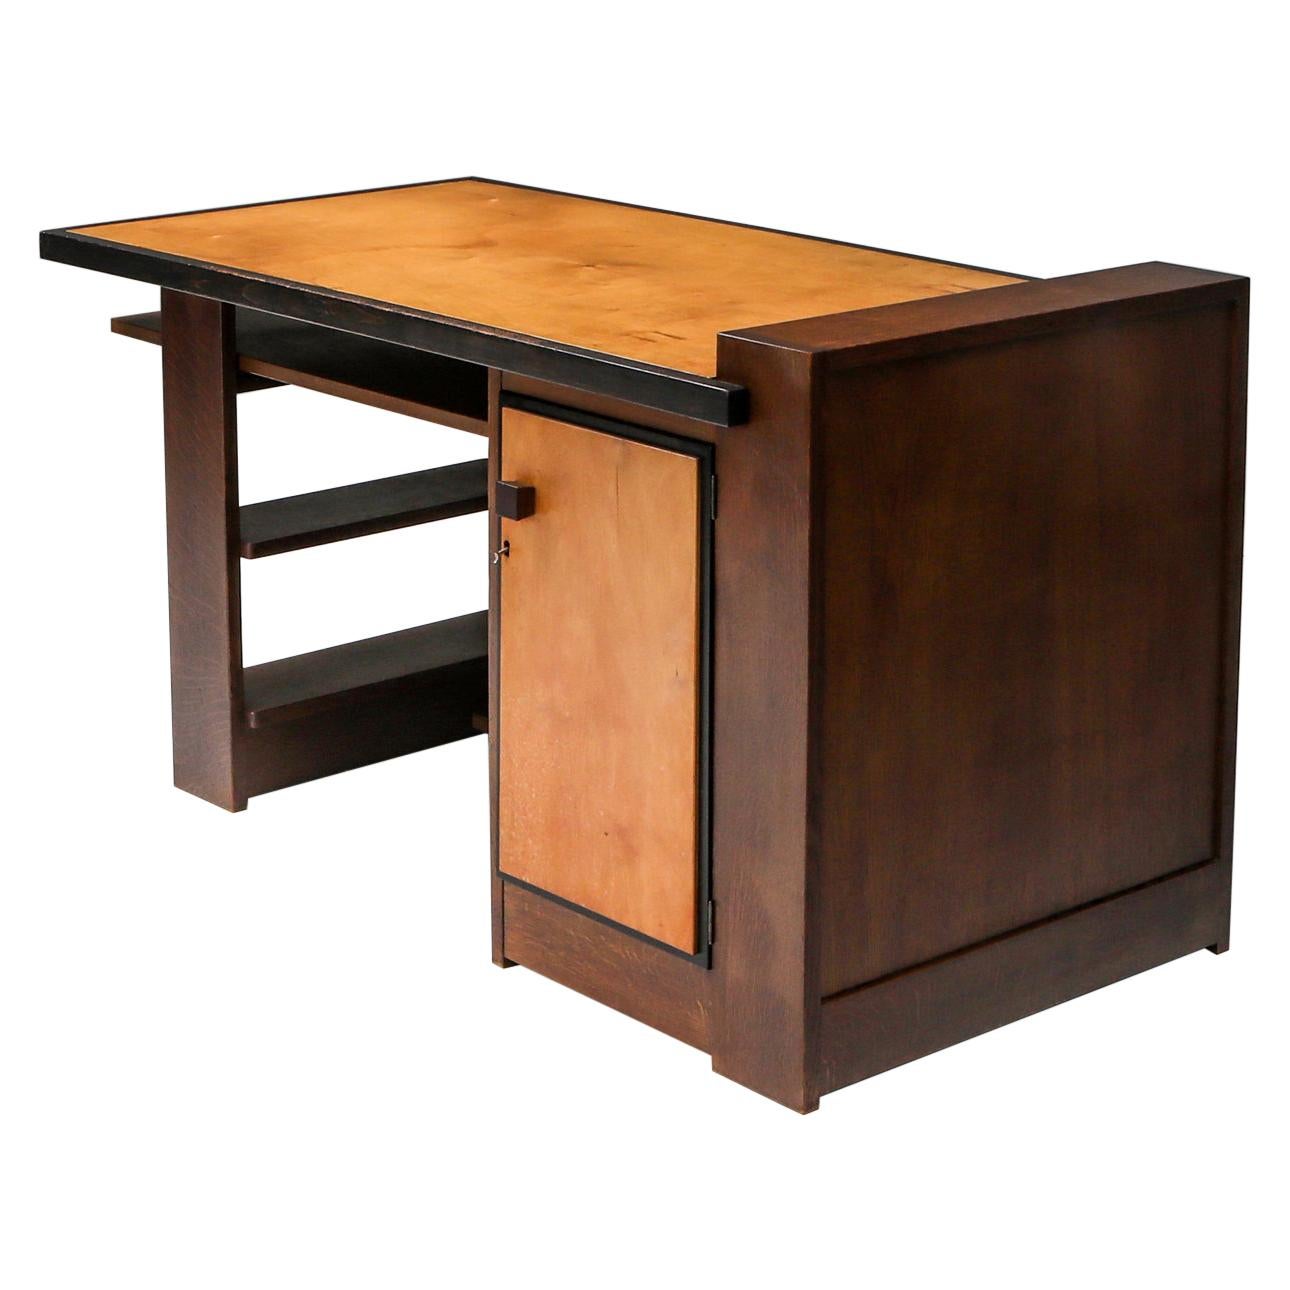 Modernist Desk by M. Wouda for H. Pander